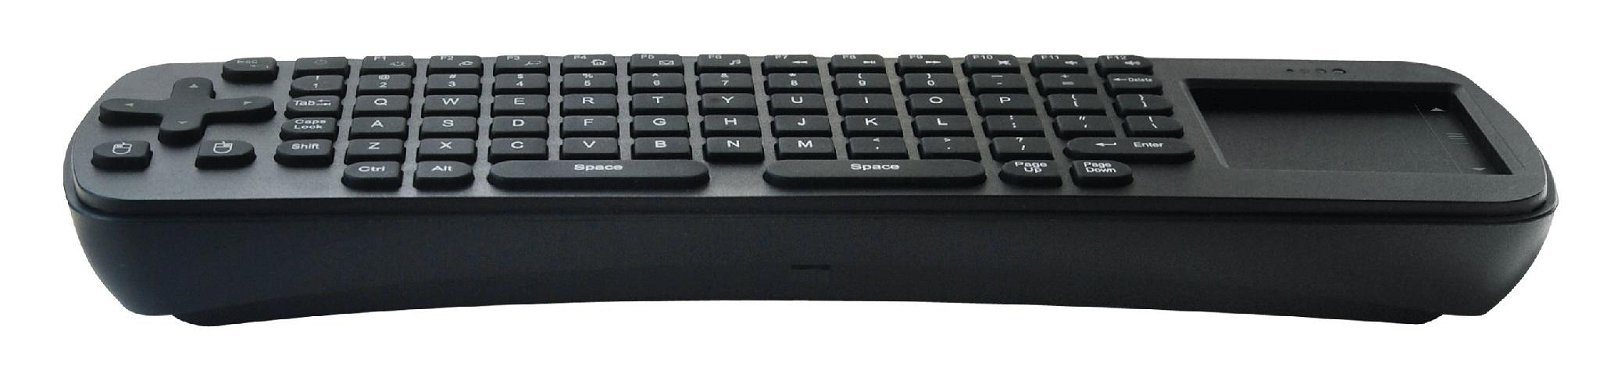 Measy RC12 Wireless Touchpad Air Mouse Keyboard Remote Control 